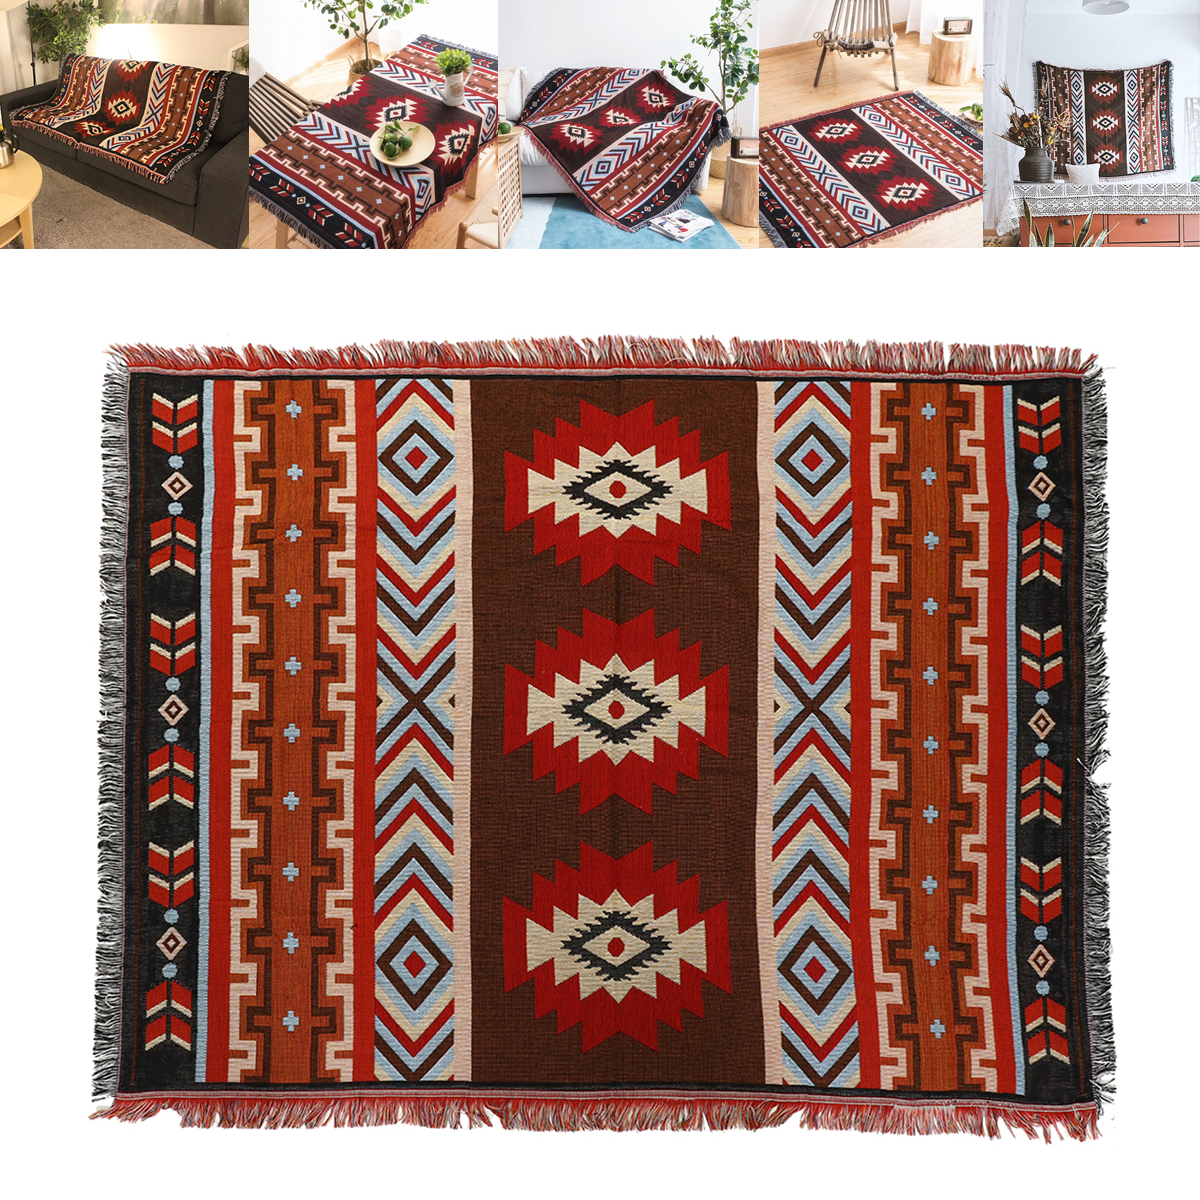 Home-Decoration-Aztec-Navajo-Towel-Mat-Throw-Wall-Hanging-Cotton-Rugs-Geometry-Woven-130160cm-1241567-2